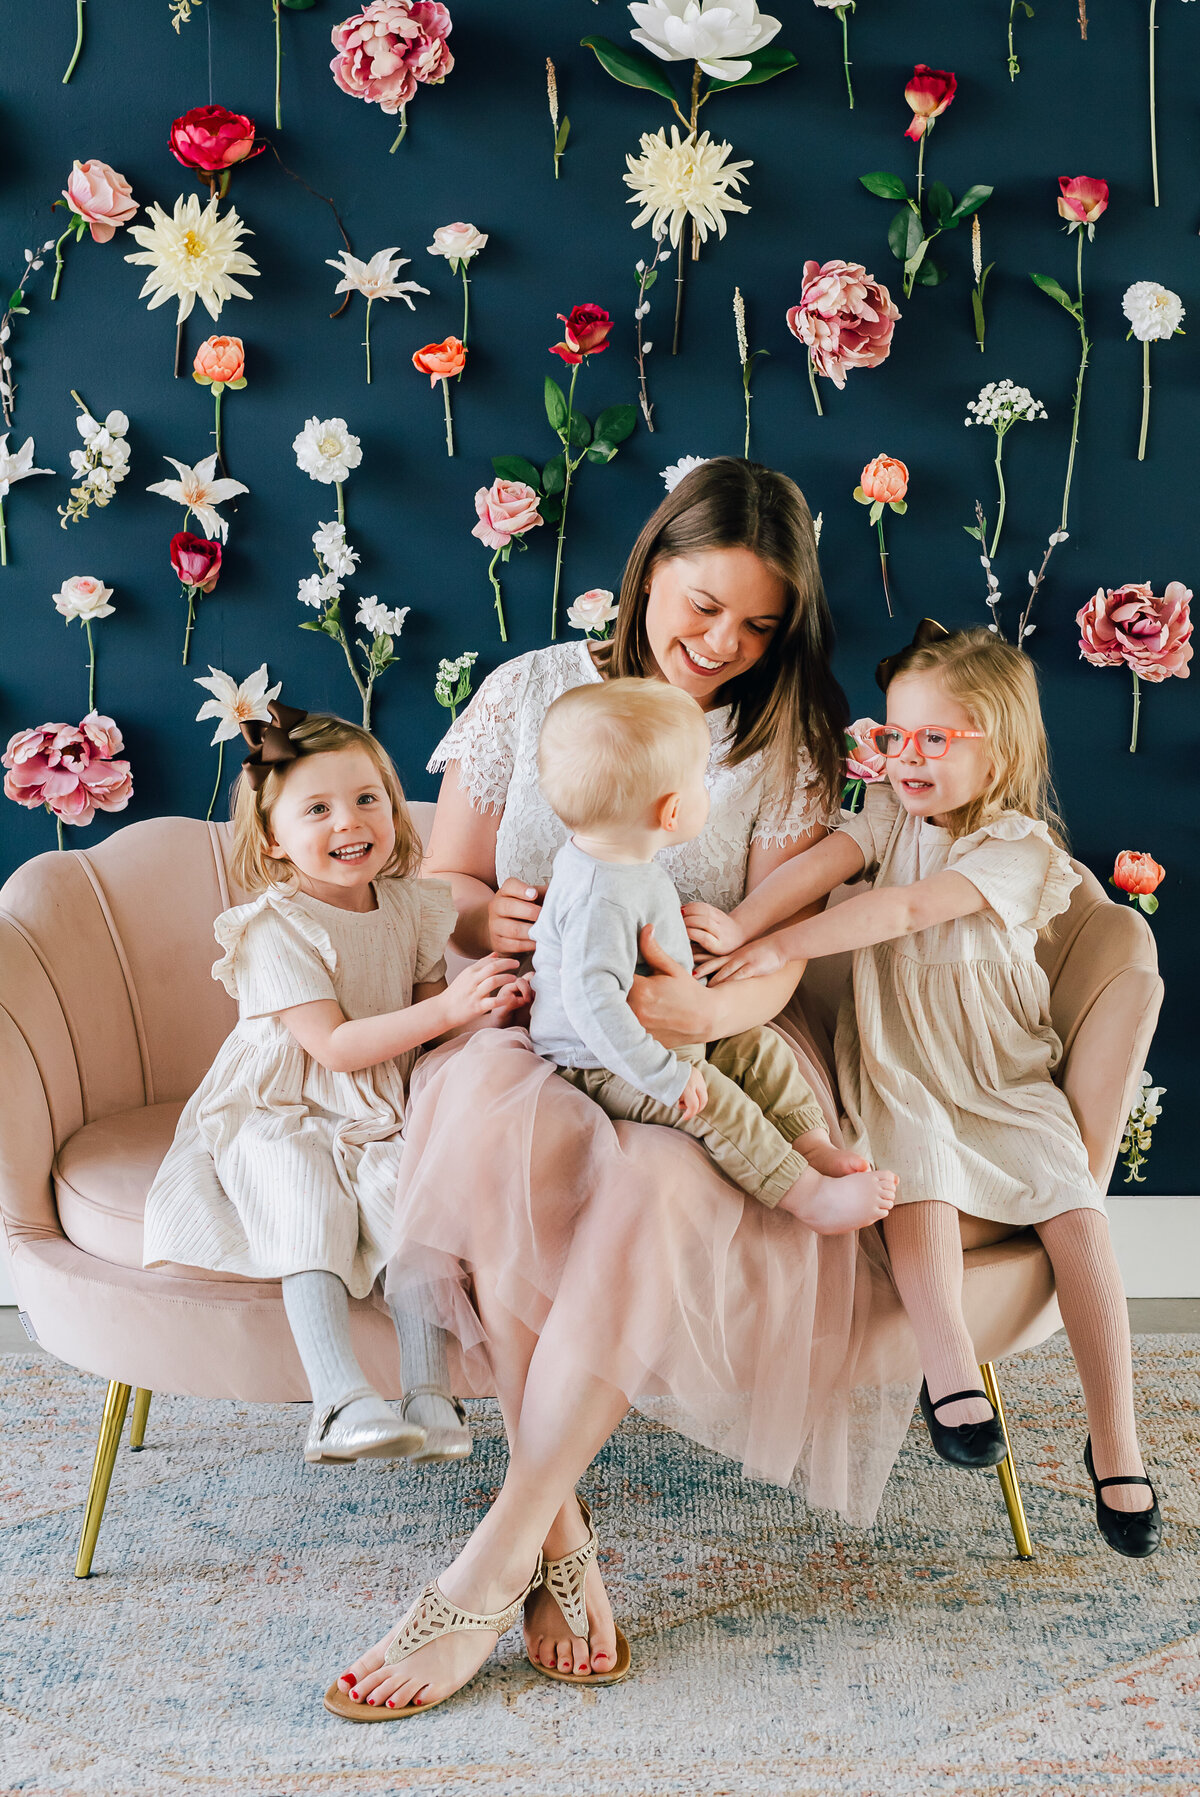 denver family photos with colorado wedding photographers sitting on a pink bench with her three children smiling and cuddling with one another in front of a floral backdrop